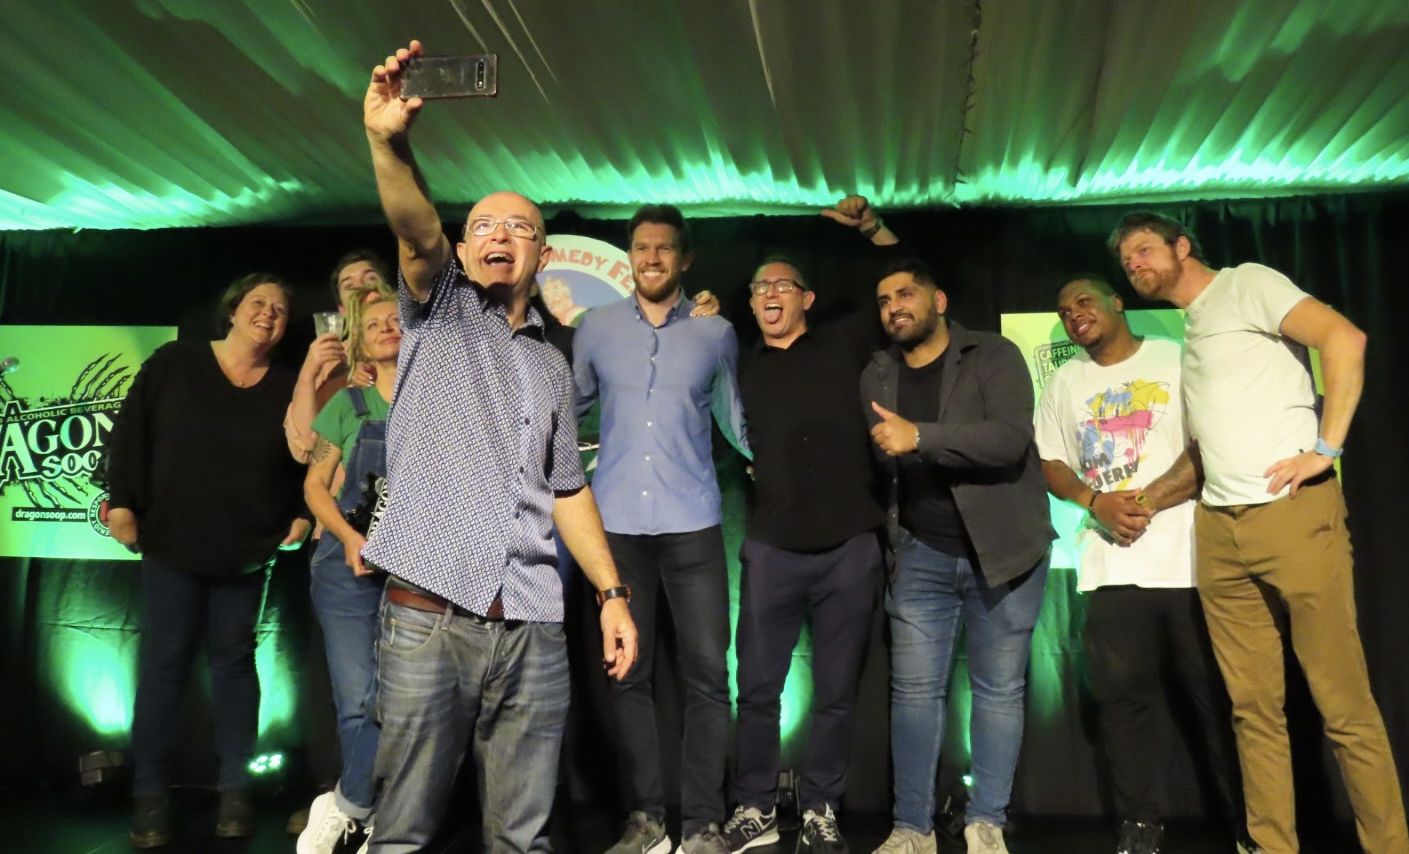 Contestants wowed the audience at the 2022 Southport New Comedian of the Year competition. Photo by Andrew Brown Media